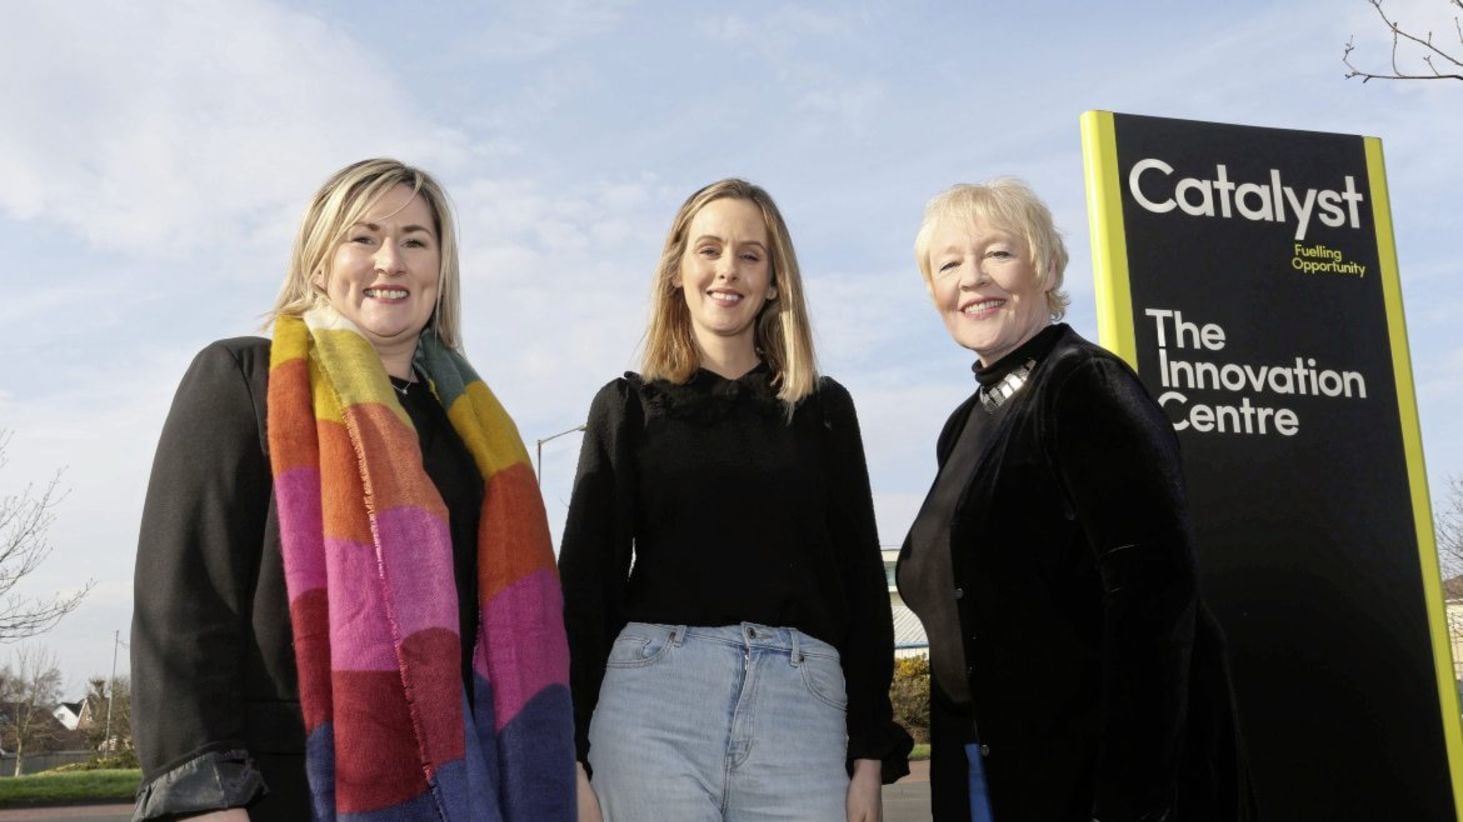 Pictured at Catalyst Innovation Centre in Derry are (from left) Clare McGee, co-founder of AwakenHub; Natasha O&rsquo;Hea, community manager at Catalyst; and Mary McKenna, co-founder of AwakenHub 